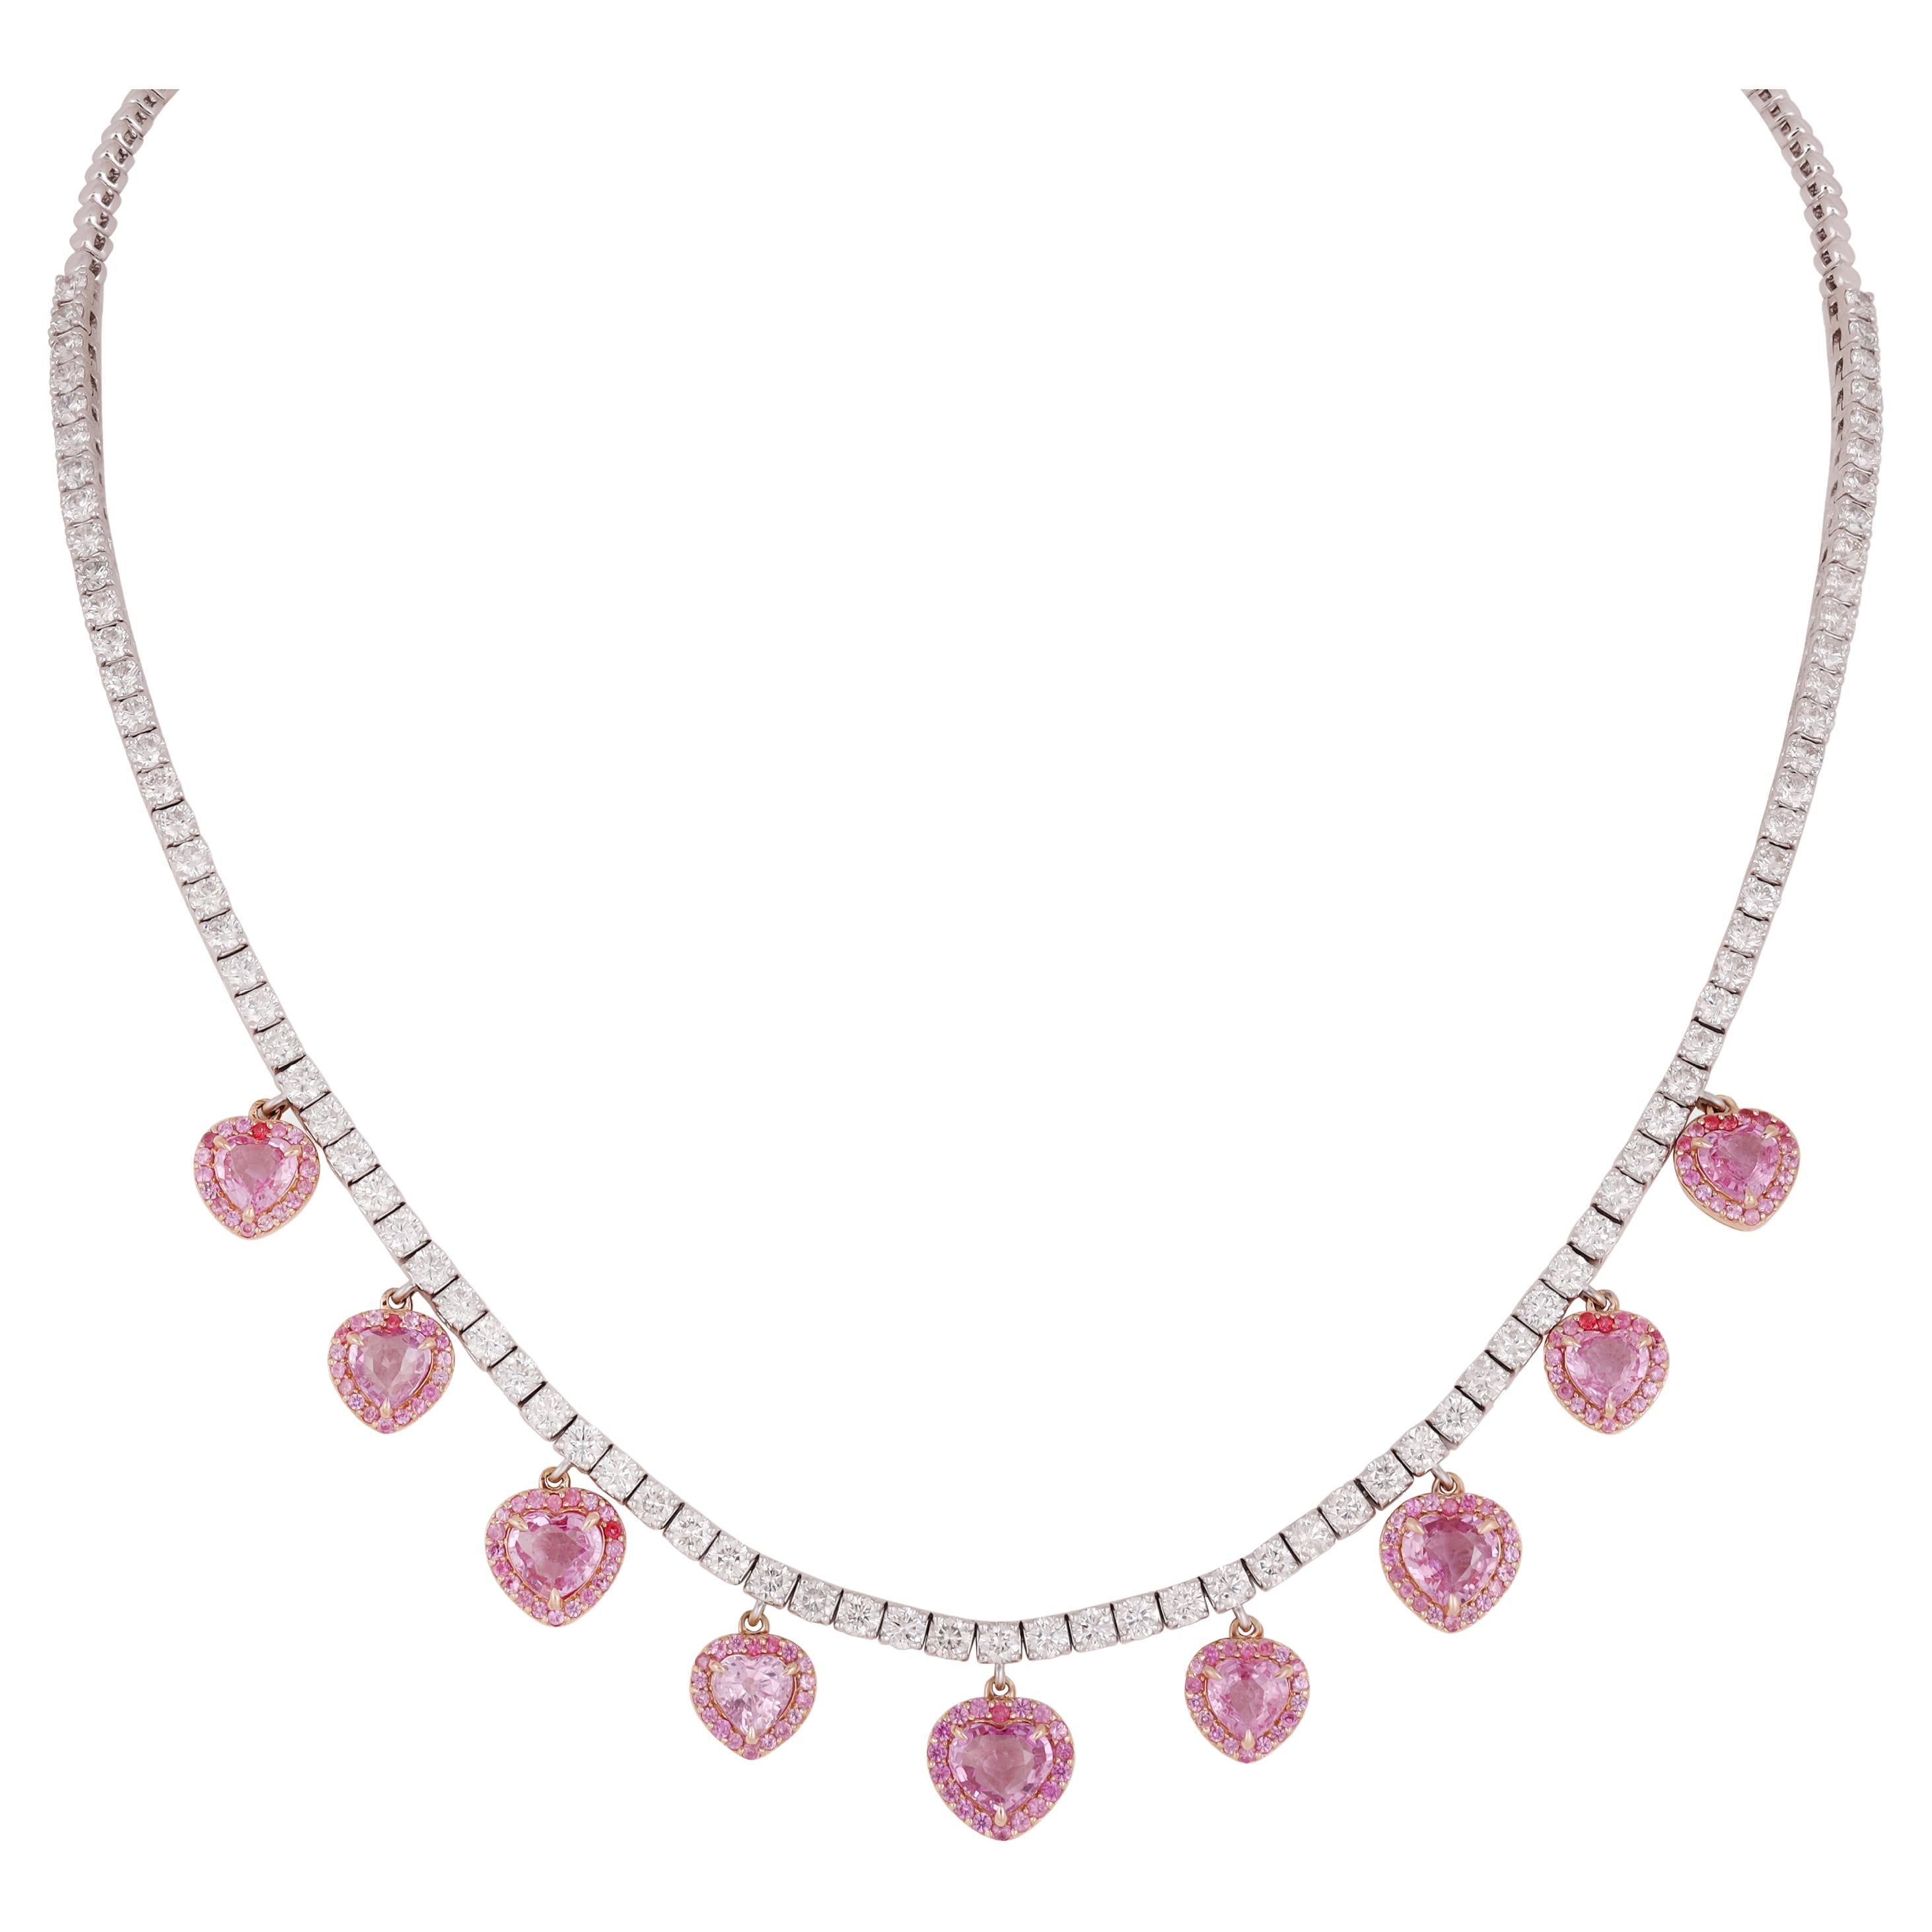 6.59 Carat Pink Sapphire & Diamond Chain Necklace in 18k White Gold For Sale